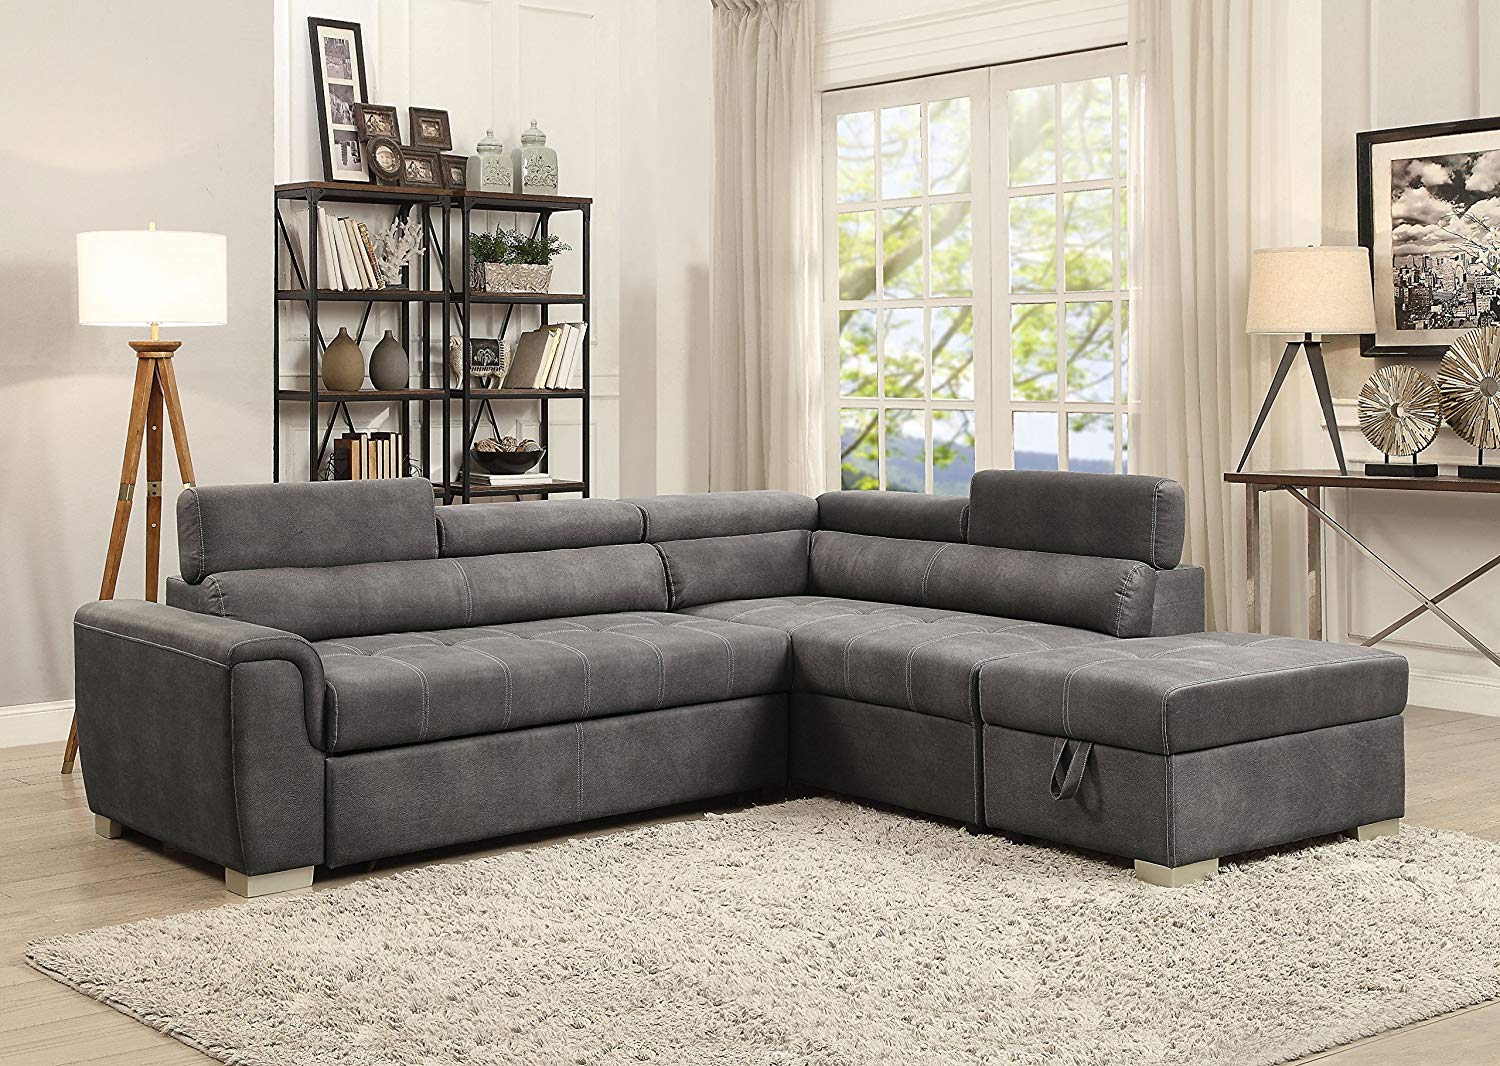 ACME Thelma Sectional Sleeper Sofa and Ottoman in Gray Polished Microfiber - image 5 of 5